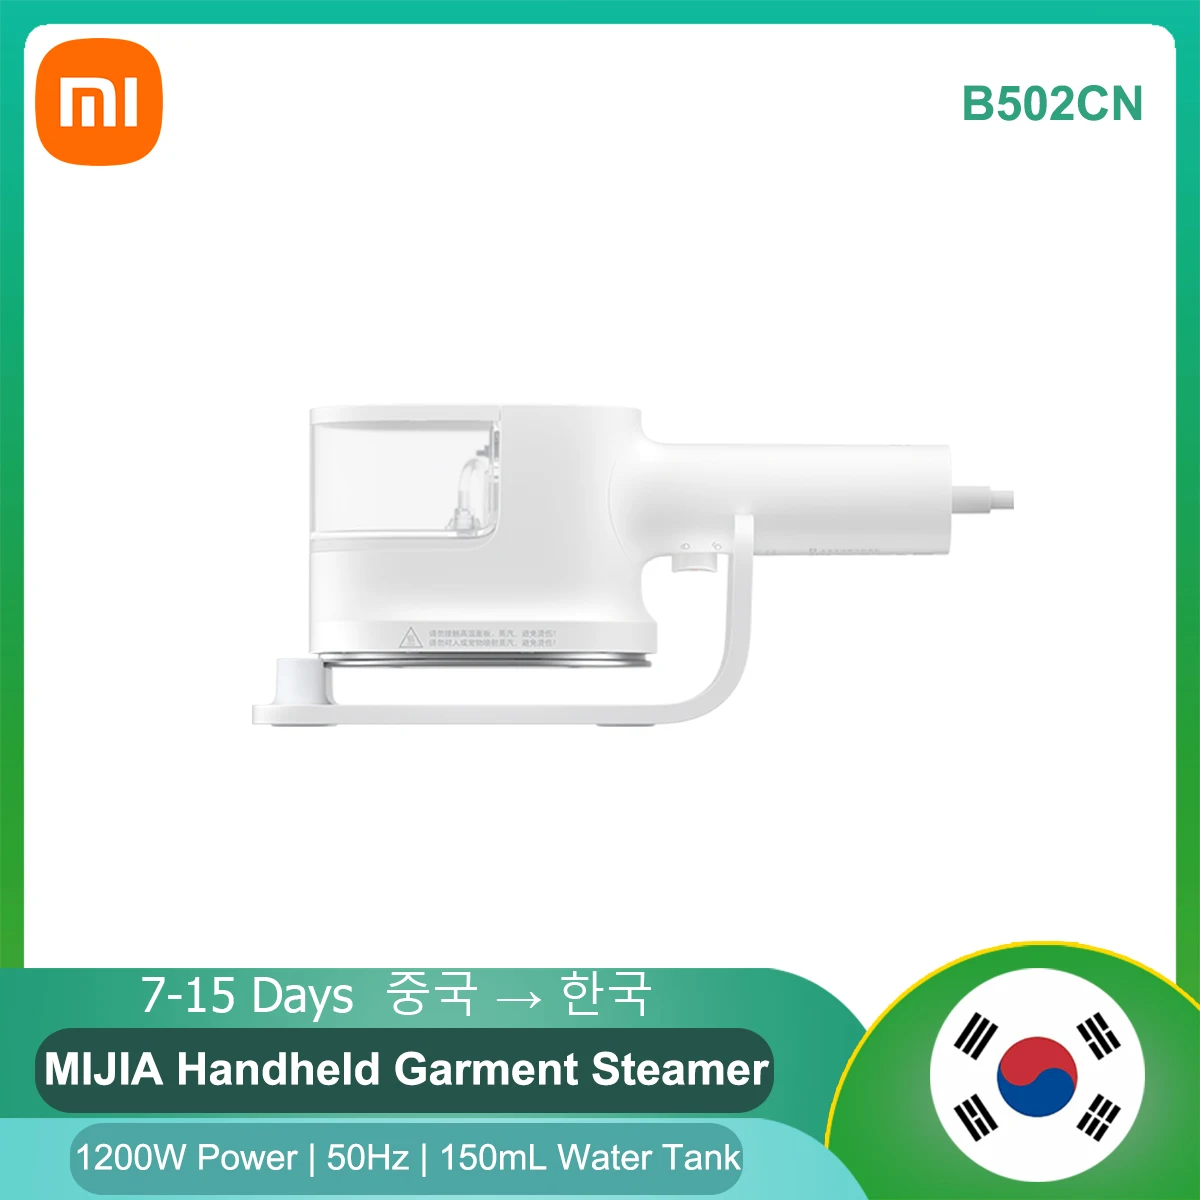 

Xiaomi Mijia Handheld Steam Ironing Machine B502CN 1200W Fast Wrinkle Removal 150ml Water Tank with Power off Protection Iron